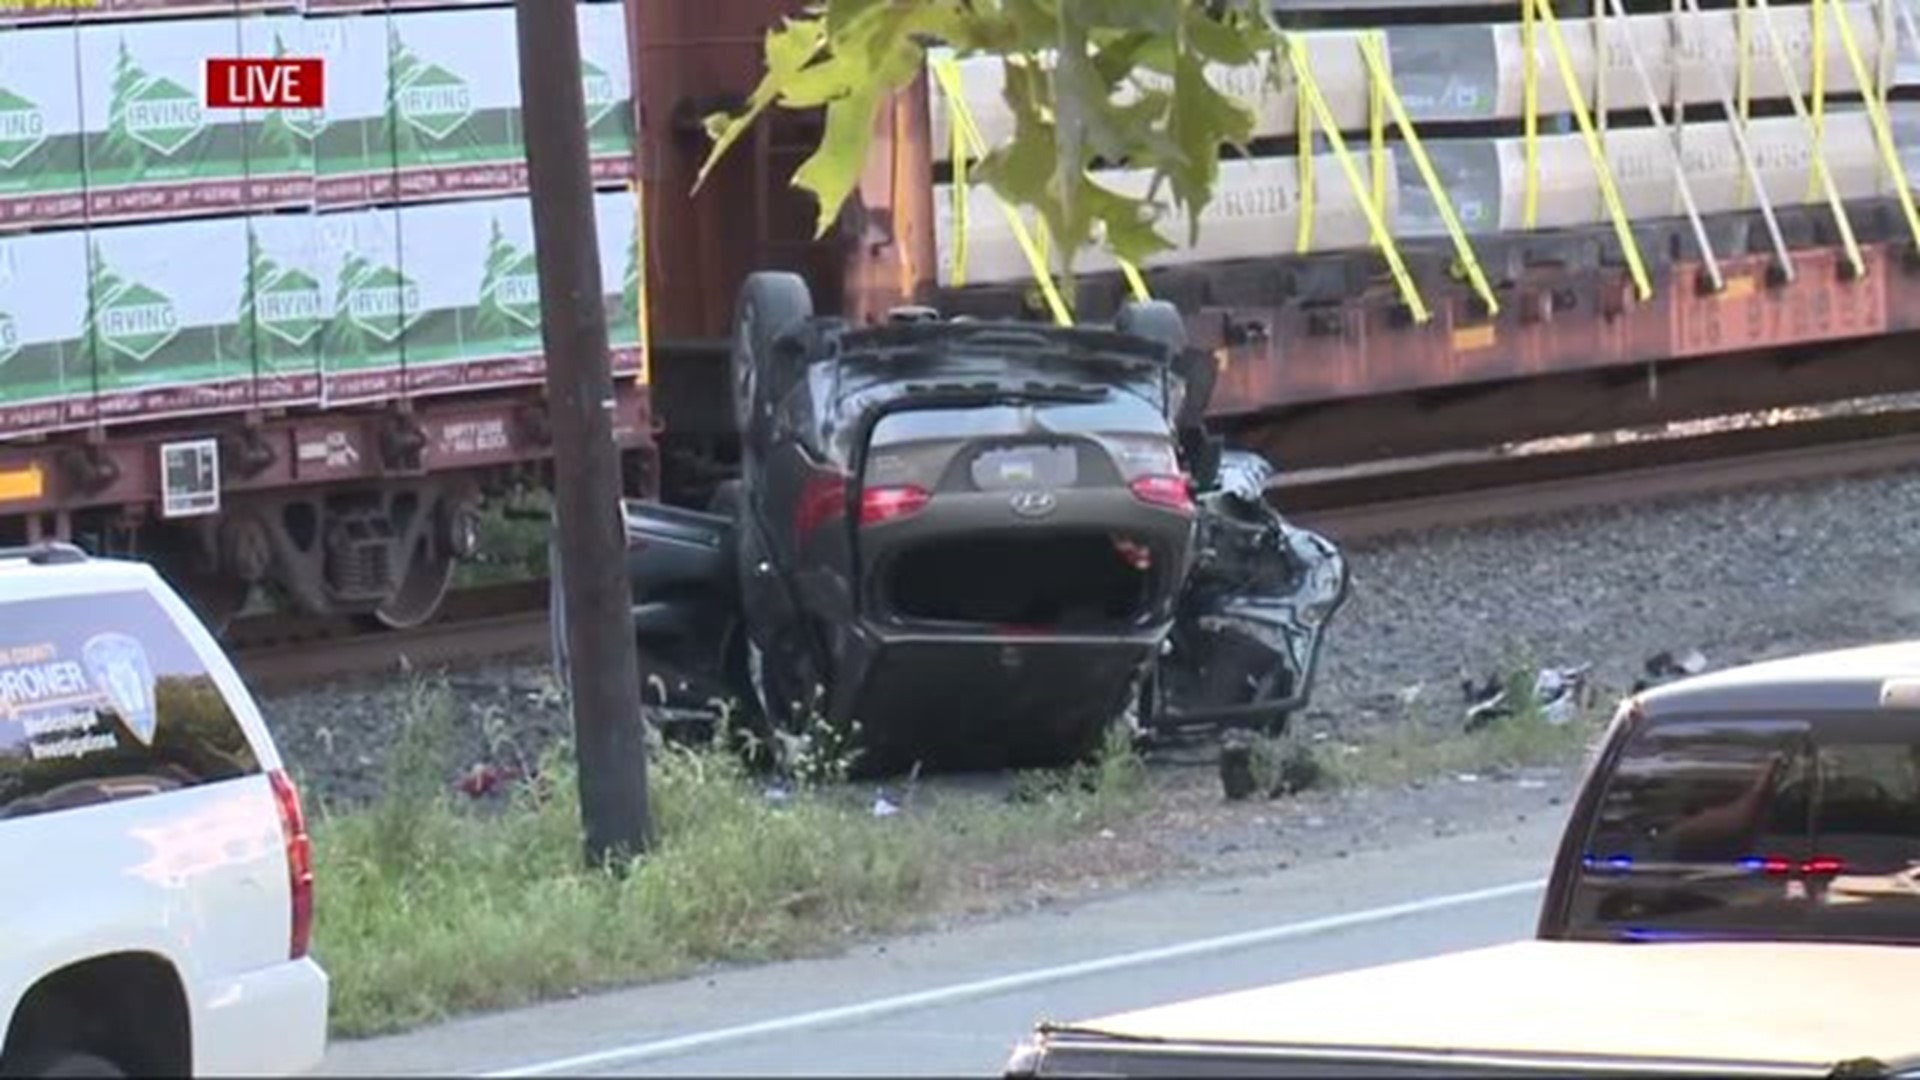 Woman killed in car accident with train in Dauphin County